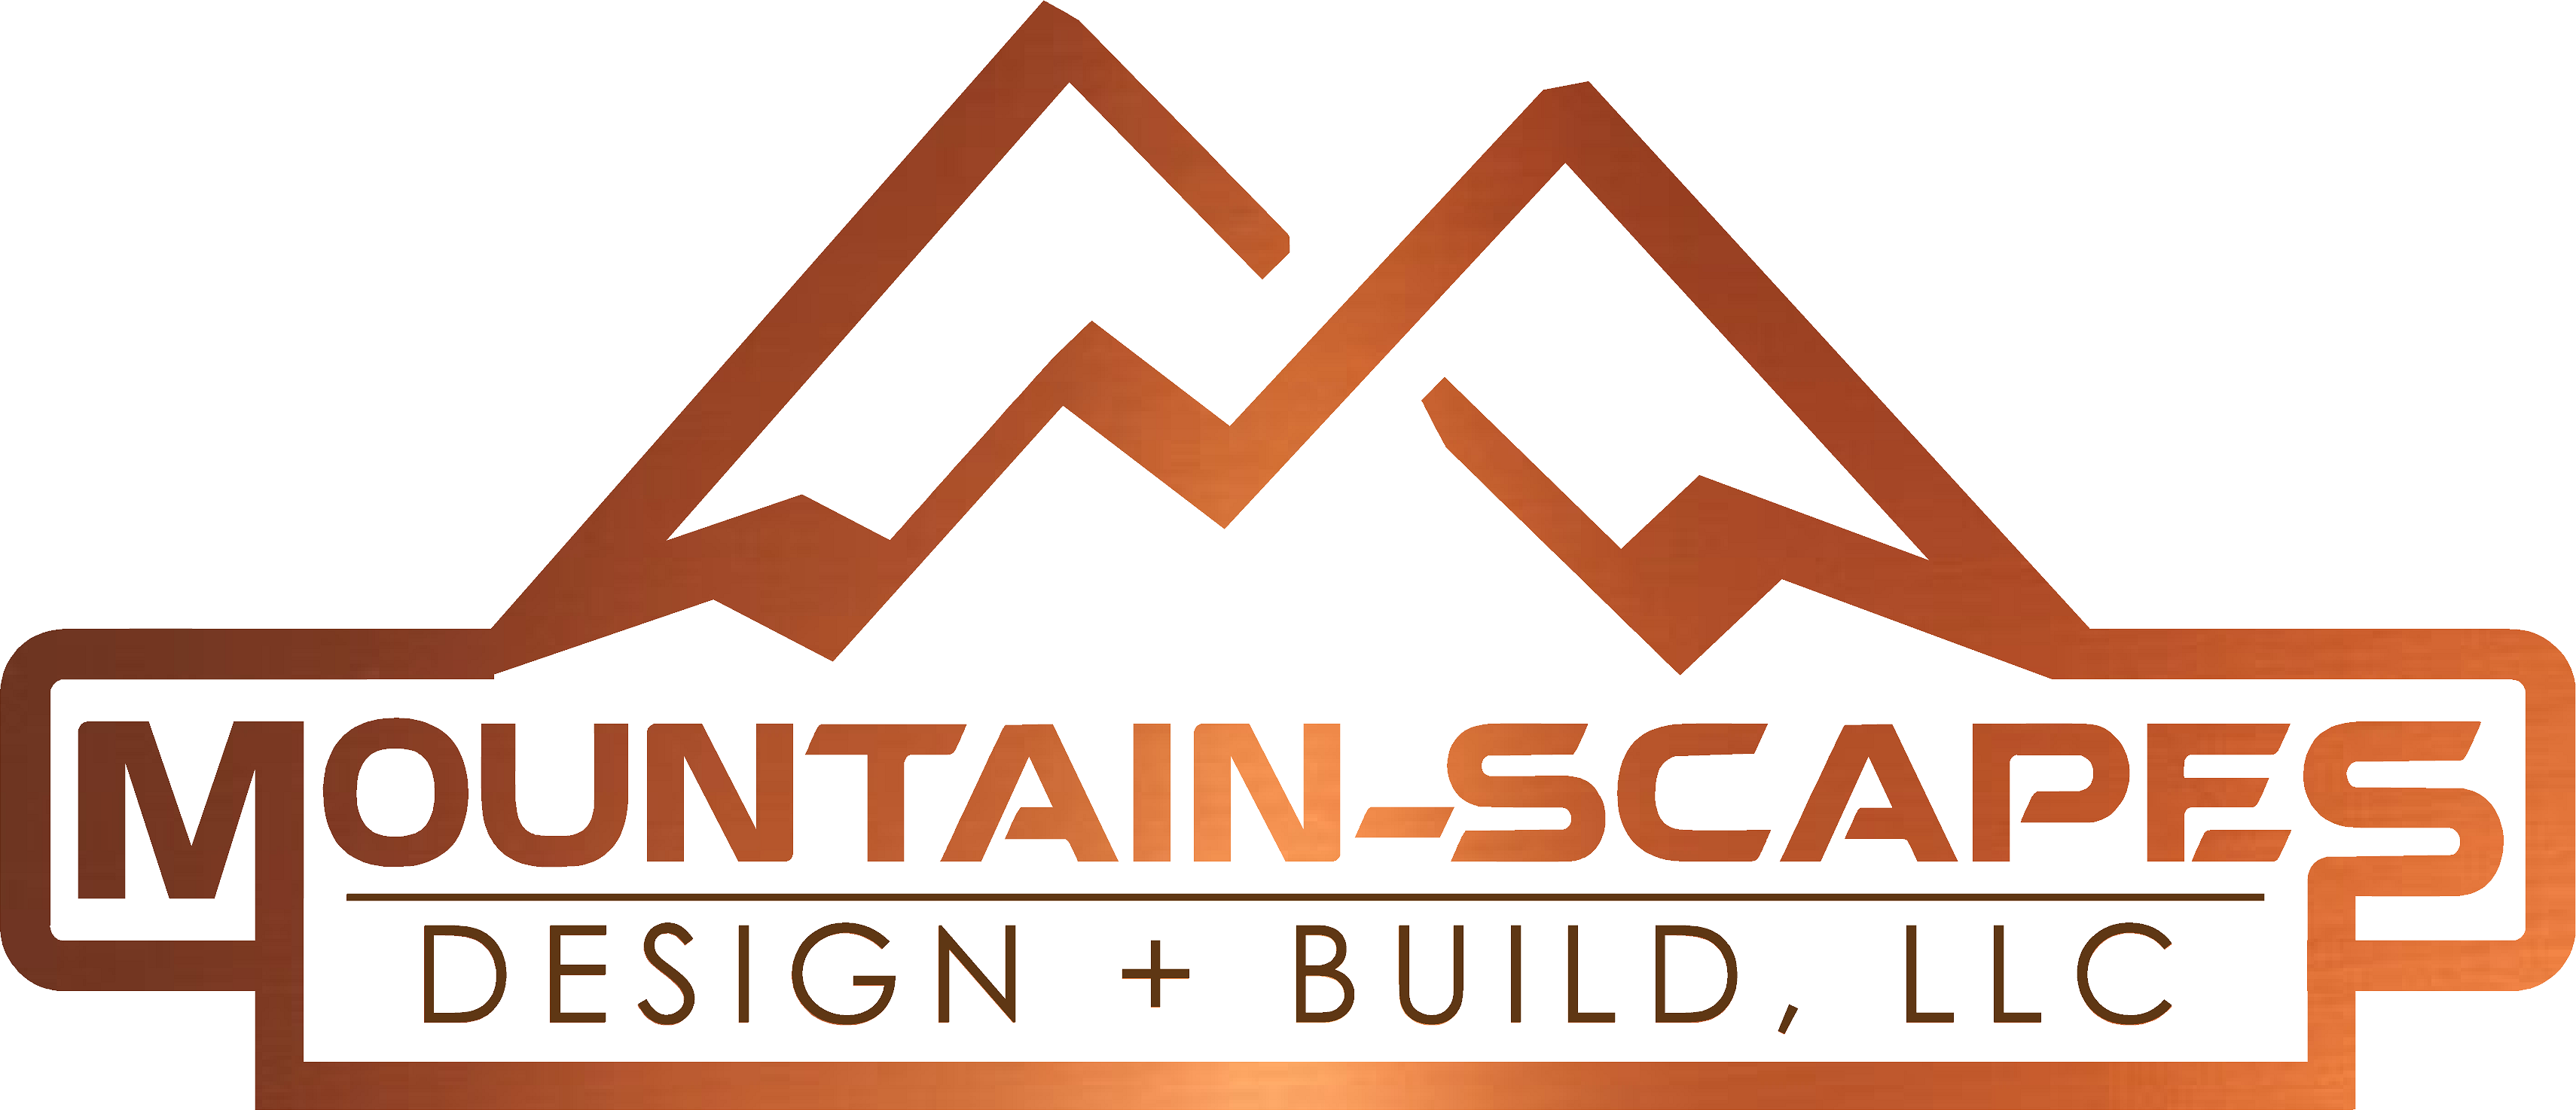 Mountain-Scapes Design and Build LLC Logo